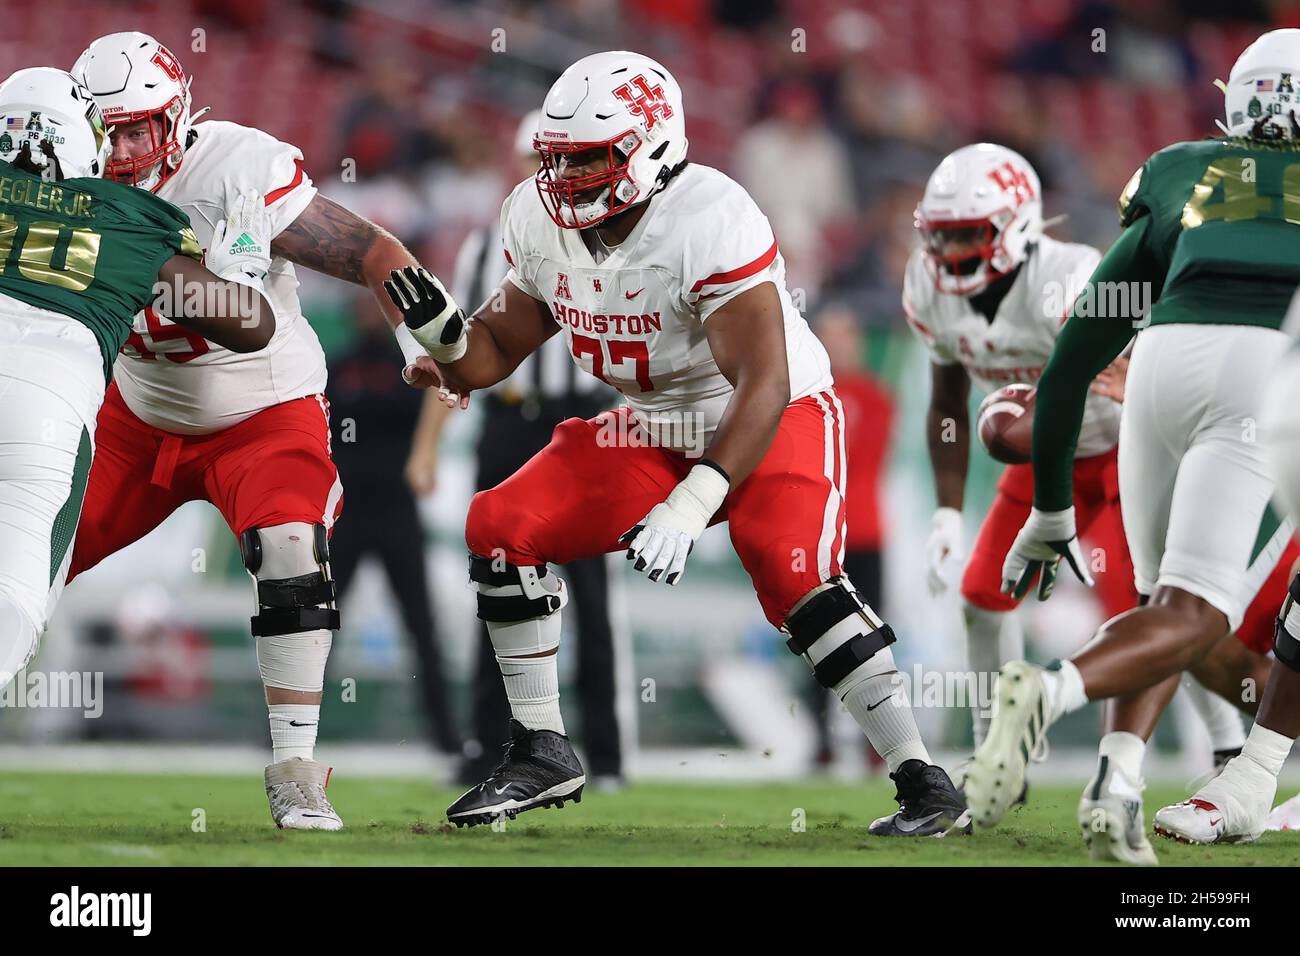 Tampa, FL, USA. 6th Nov, 2021. Houston Cougars offensive lineman Keenan Murphy (77) blocks during the game between the Houston Cougars and the South Florida Bulls at Raymond James Stadium in Tampa, FL. (Photo by Peter Joneleit). Credit: csm/Alamy Live News Stock Photo